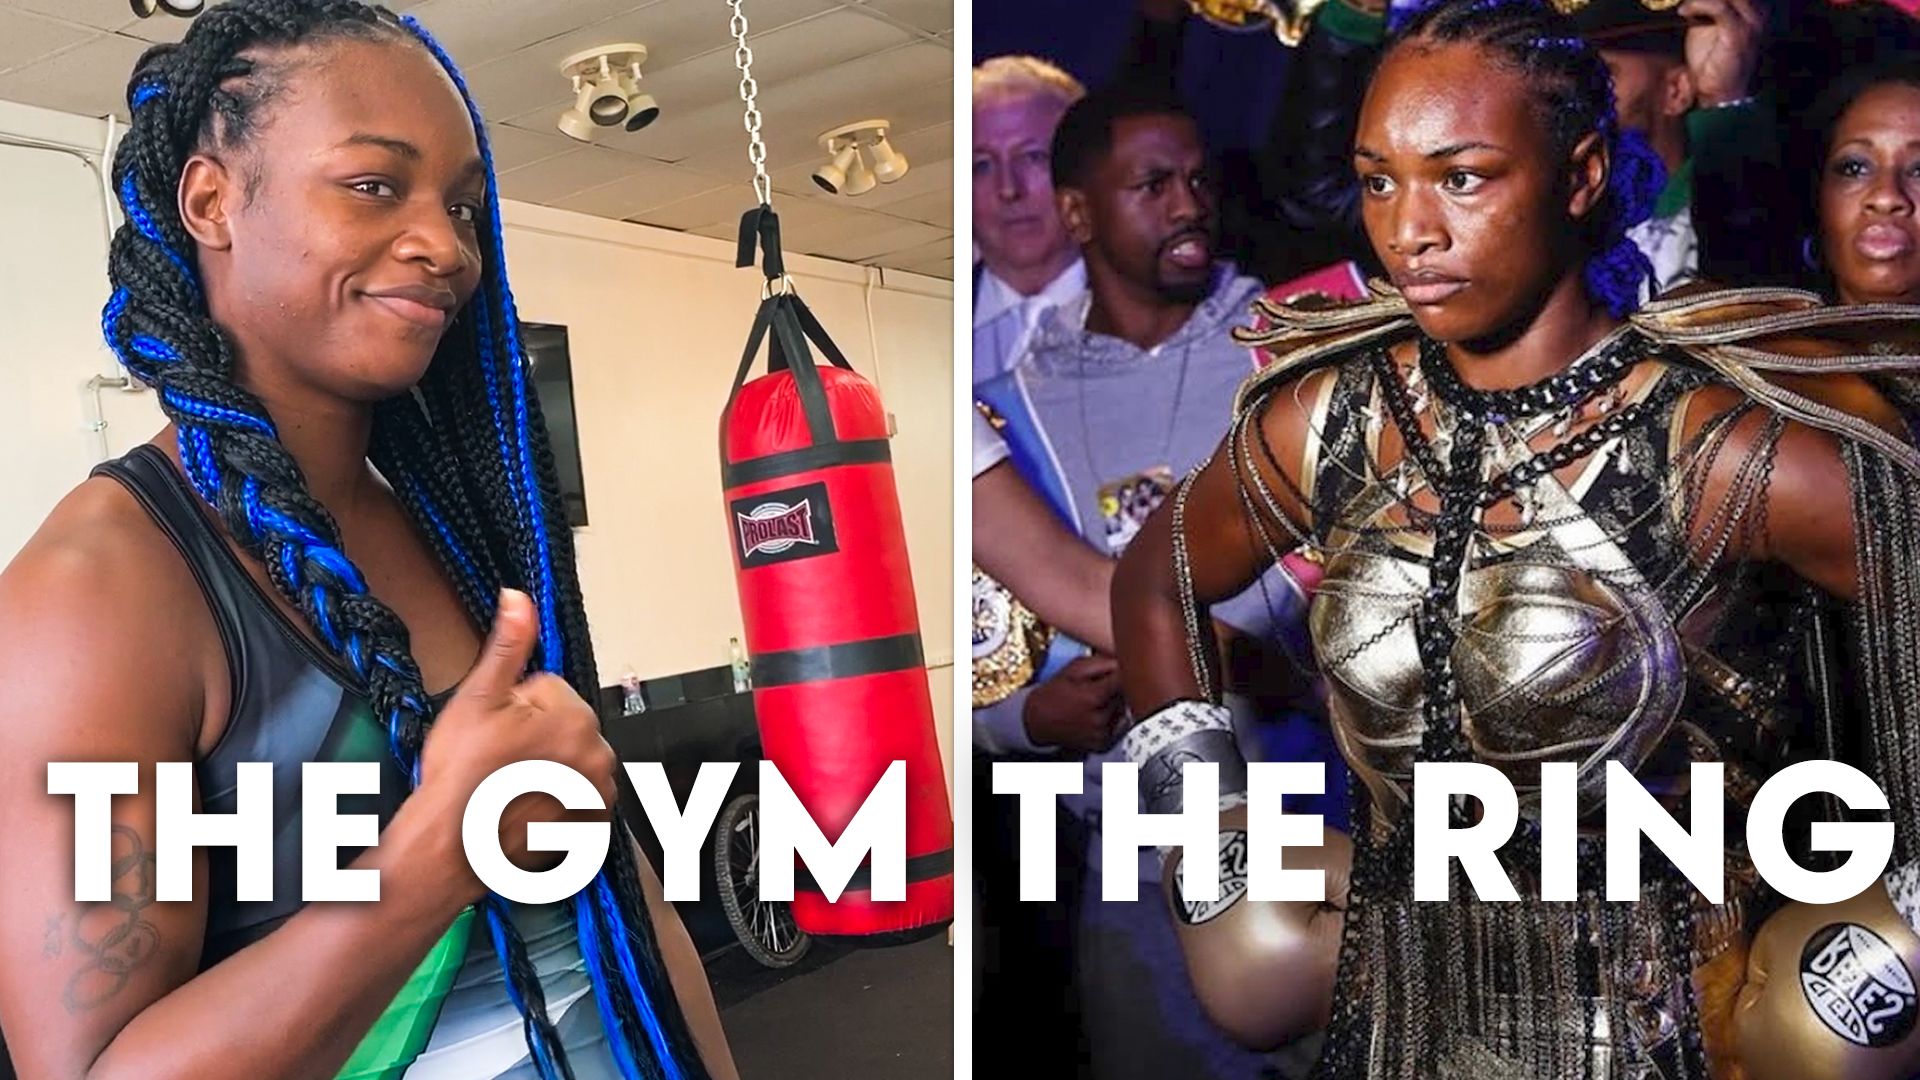 Watch Pro Boxer Claressa Shields' Daily Routine and Boxing Style